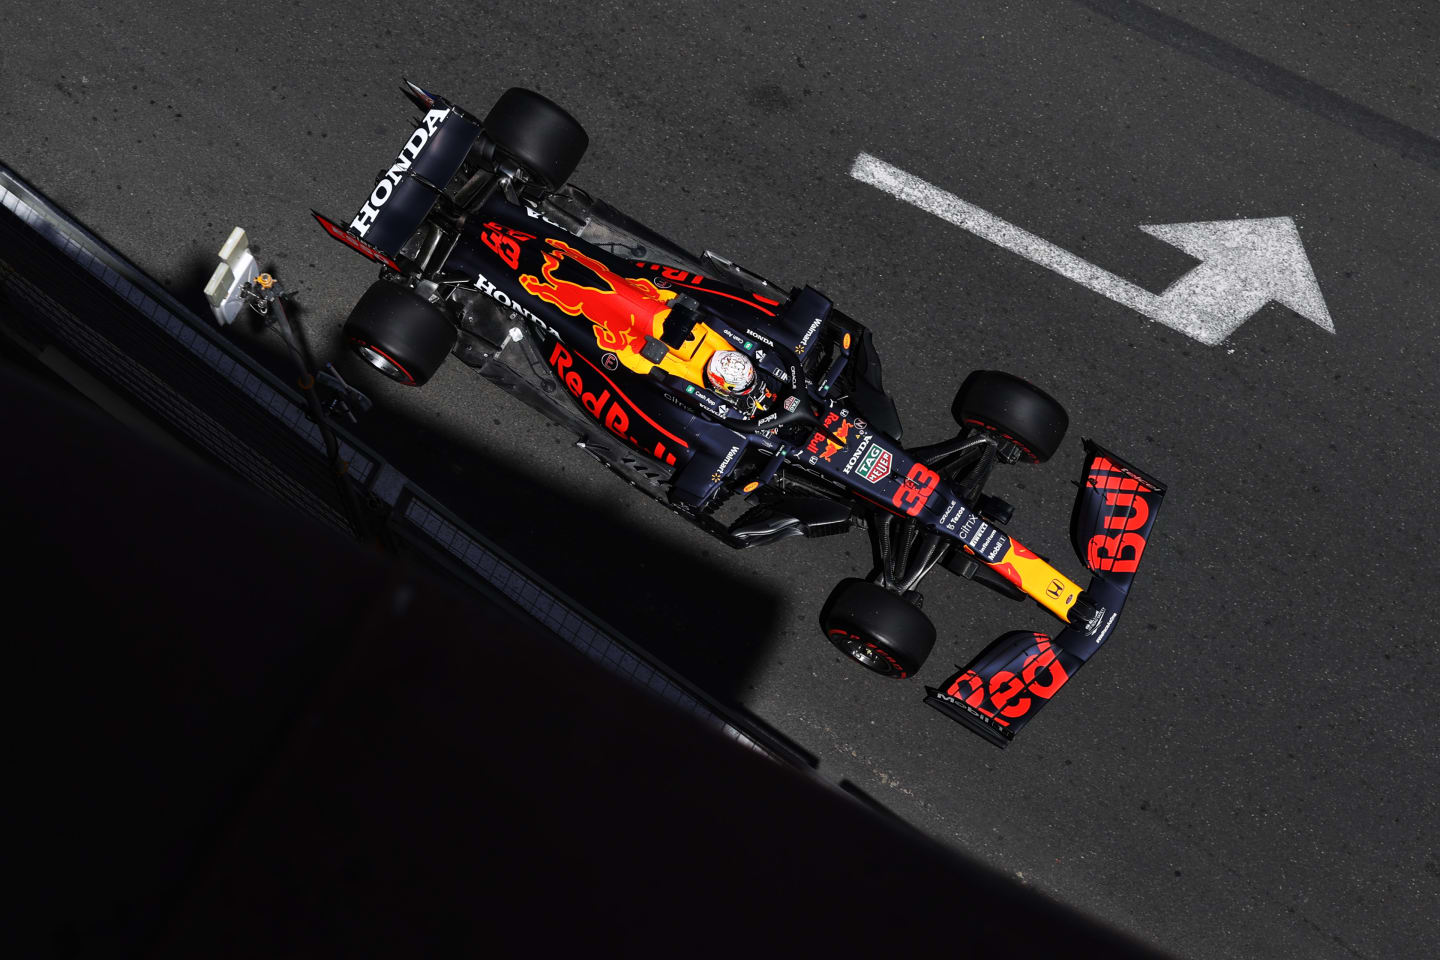 BAKU, AZERBAIJAN - JUNE 04: Max Verstappen of the Netherlands driving the (33) Red Bull Racing RB16B Honda on track during practice ahead of the F1 Grand Prix of Azerbaijan at Baku City Circuit on June 04, 2021 in Baku, Azerbaijan. (Photo by Clive Rose/Getty Images)